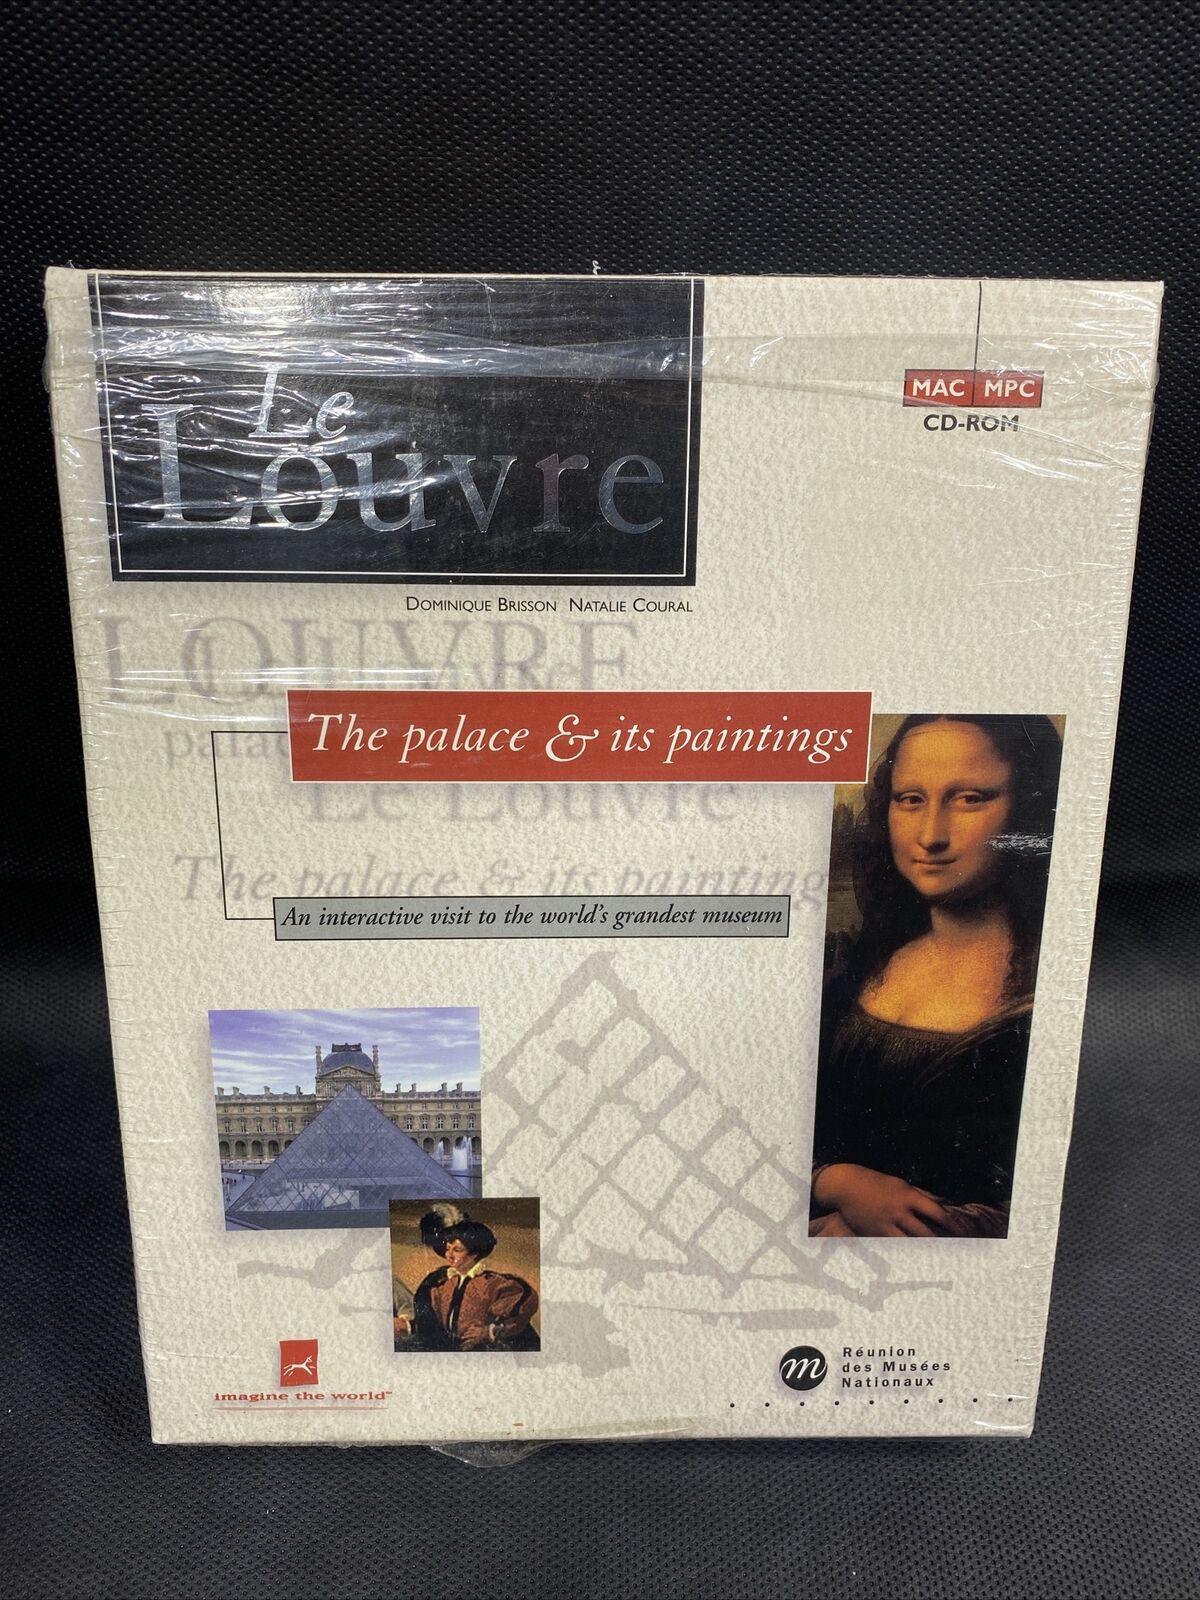 Le Louvre - The Palace And Its Paintings - CD-Rom - Mac or PC 1995 Excellent